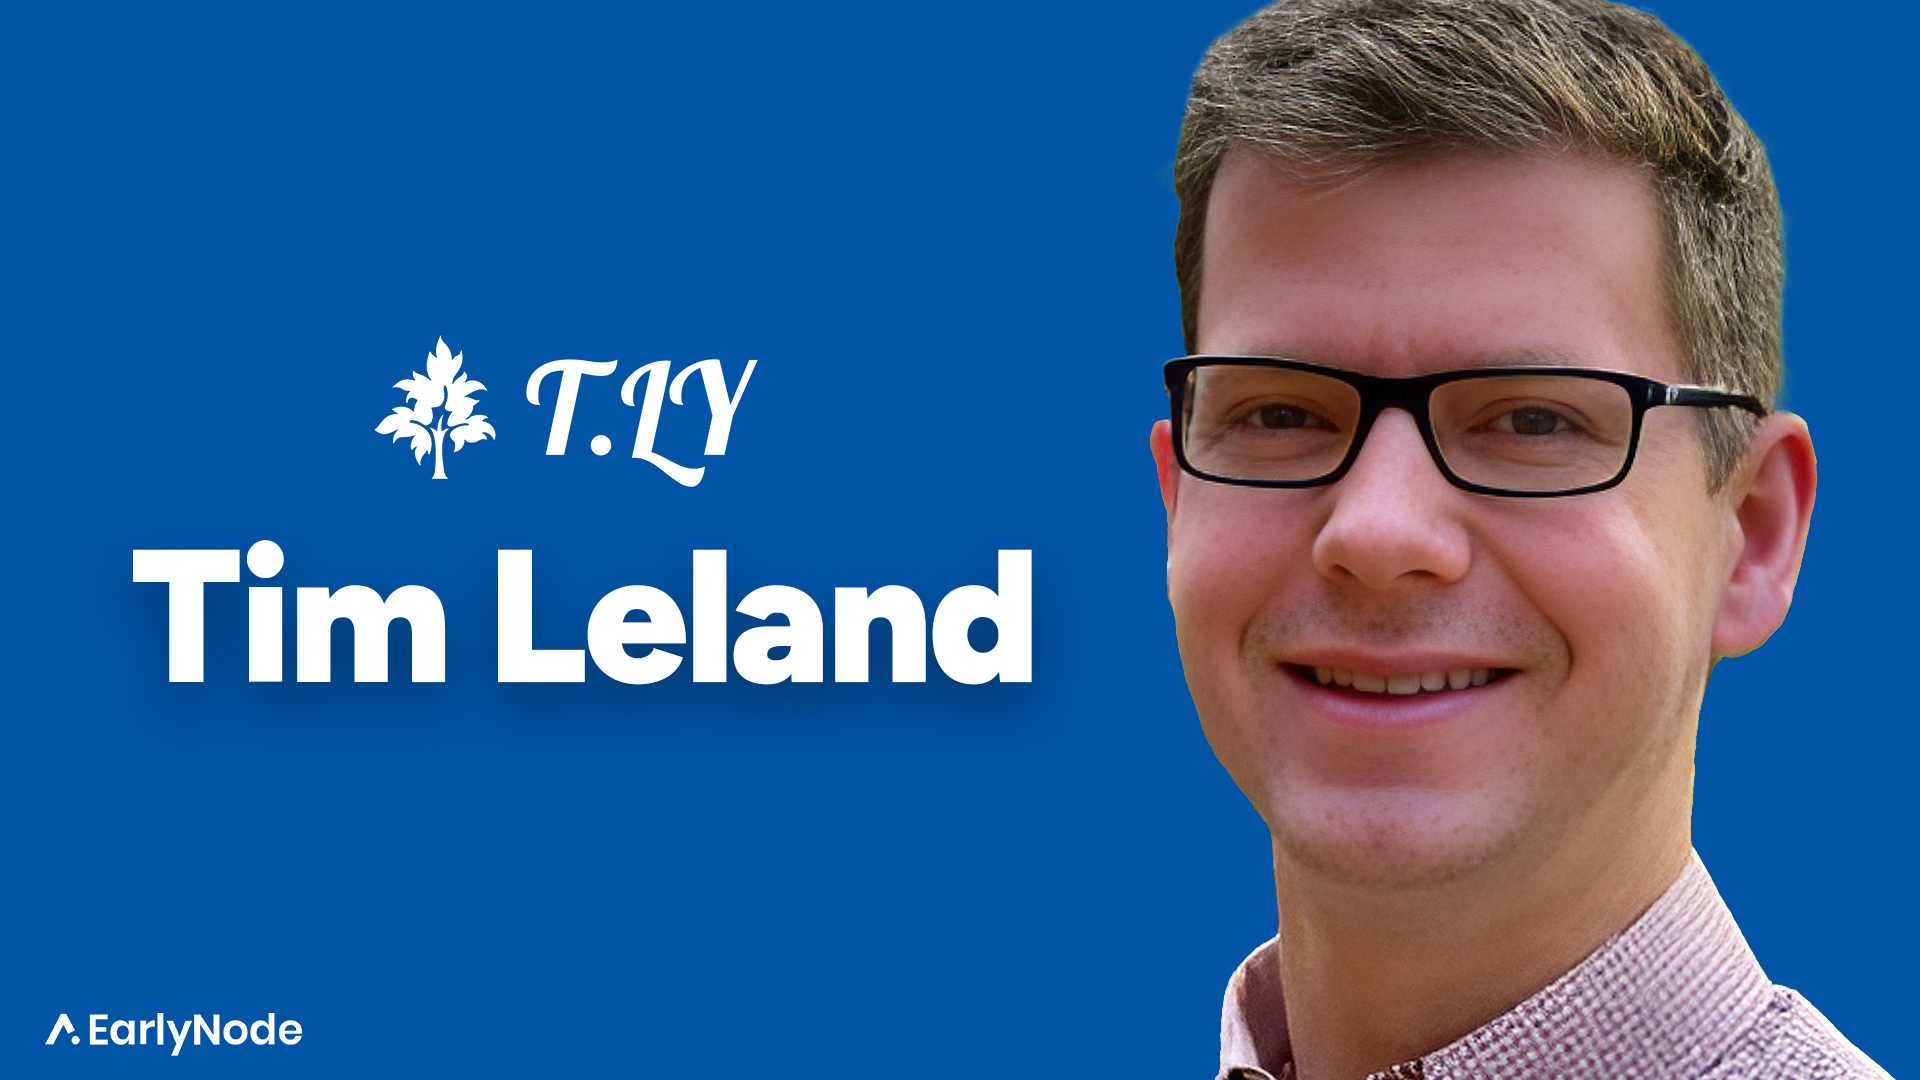 Riding Solo: Breaking Through as a Solopreneur with Tim Leland (Founder of T.ly)